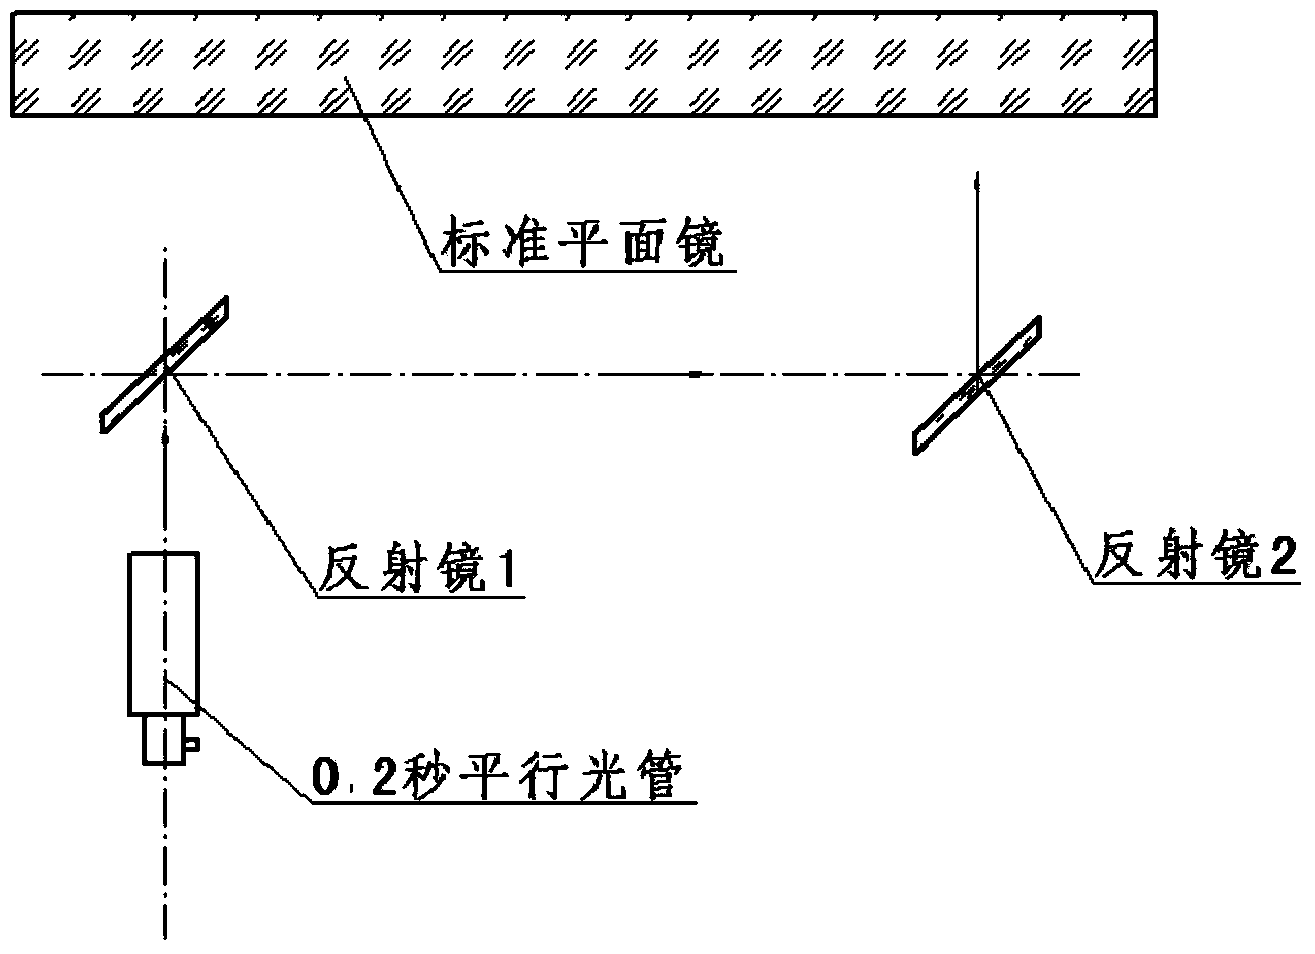 Adjustment method for reflectors of periscopic type acquisition and tracking mechanism